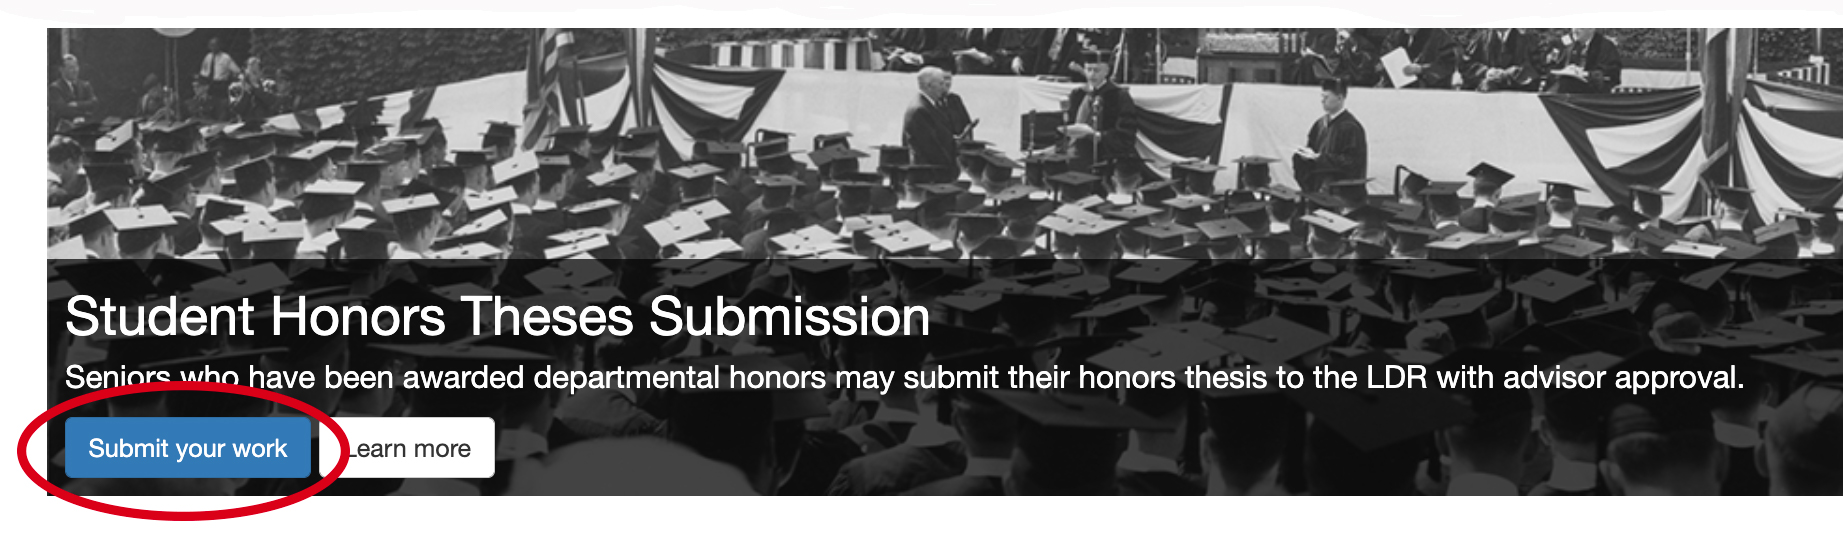 student theses submission banner on LDR homepage, showing Submit you work button that leads to the upload form